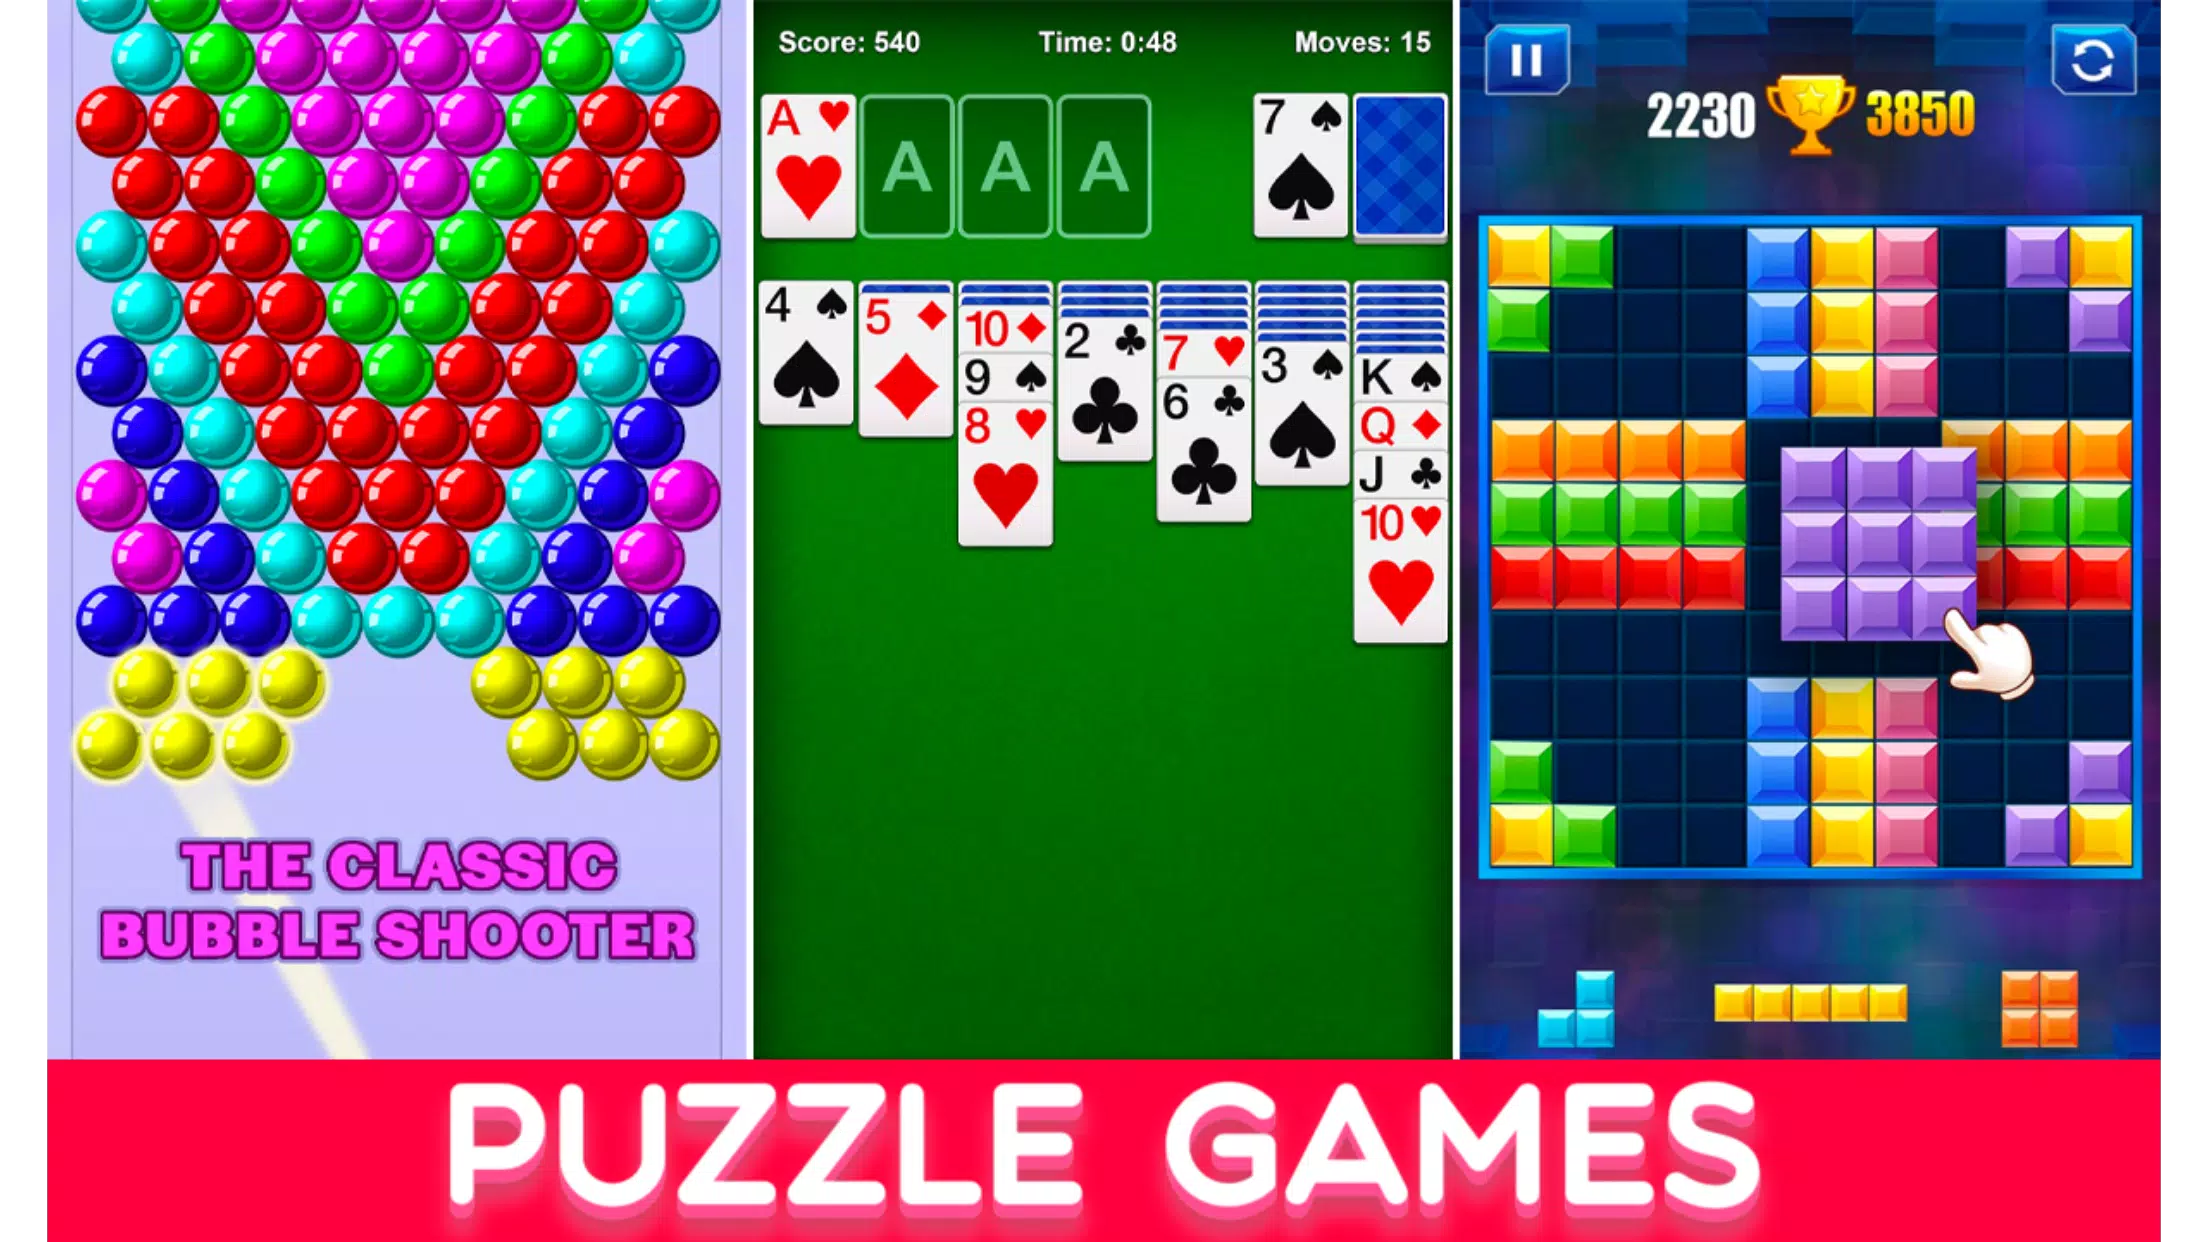 All Games: All In One Mix Game Game for Android - Download